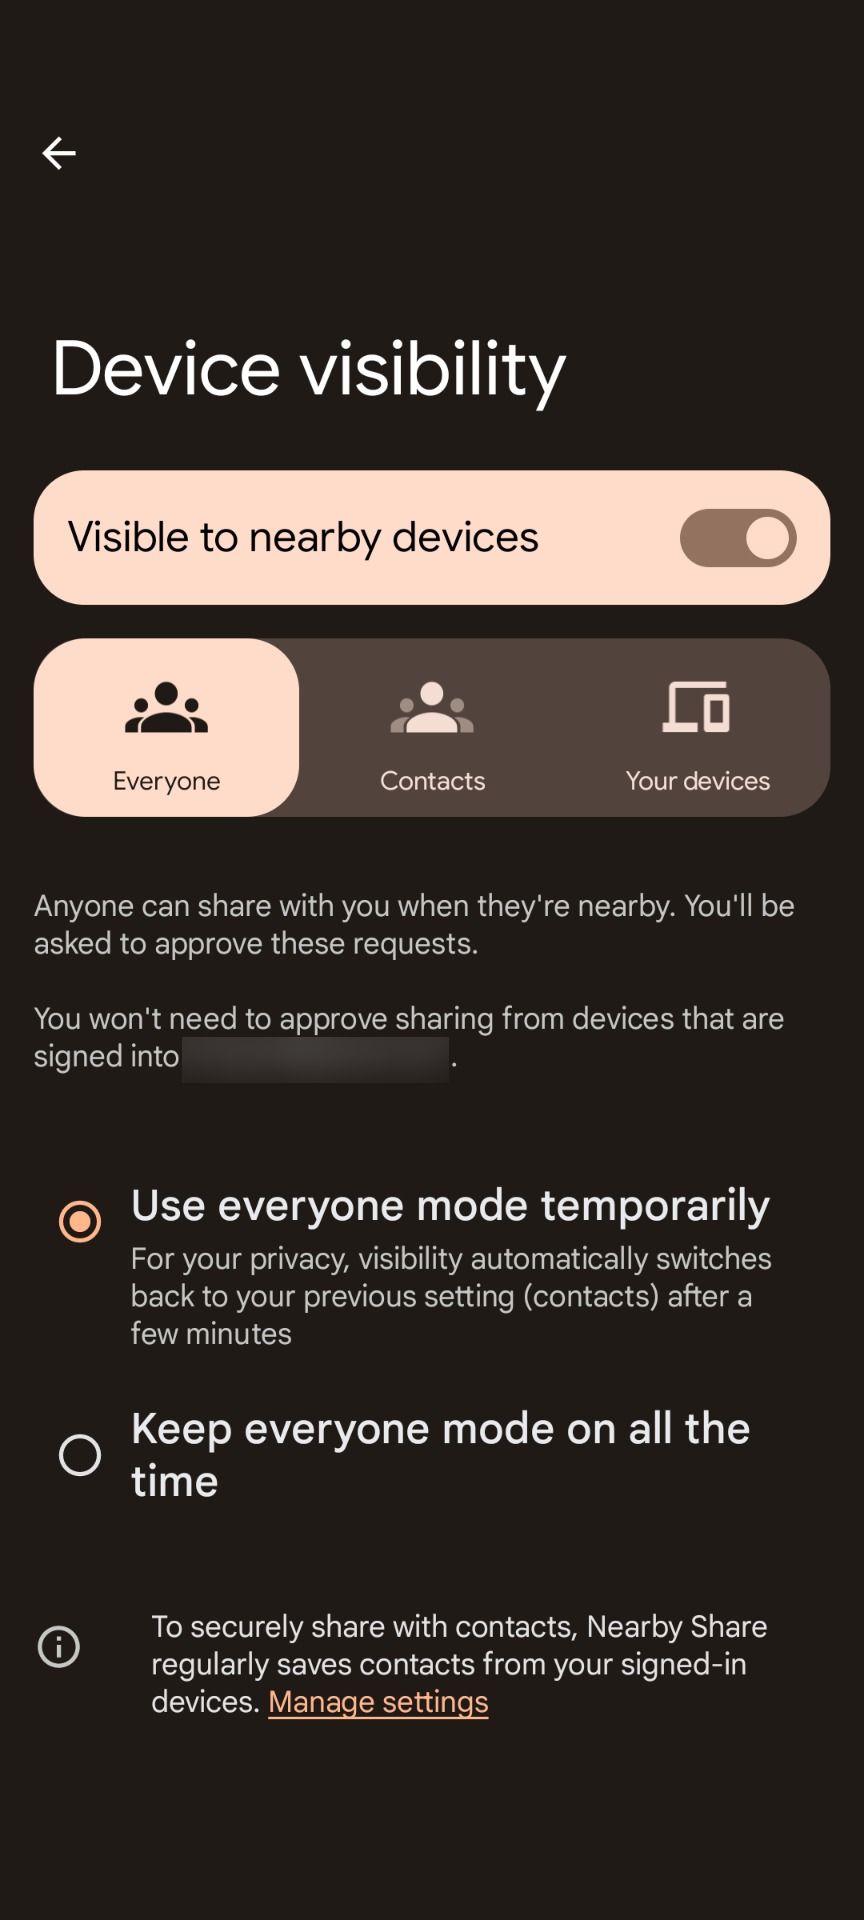 Nearby Share Device visibility settings set to everyone